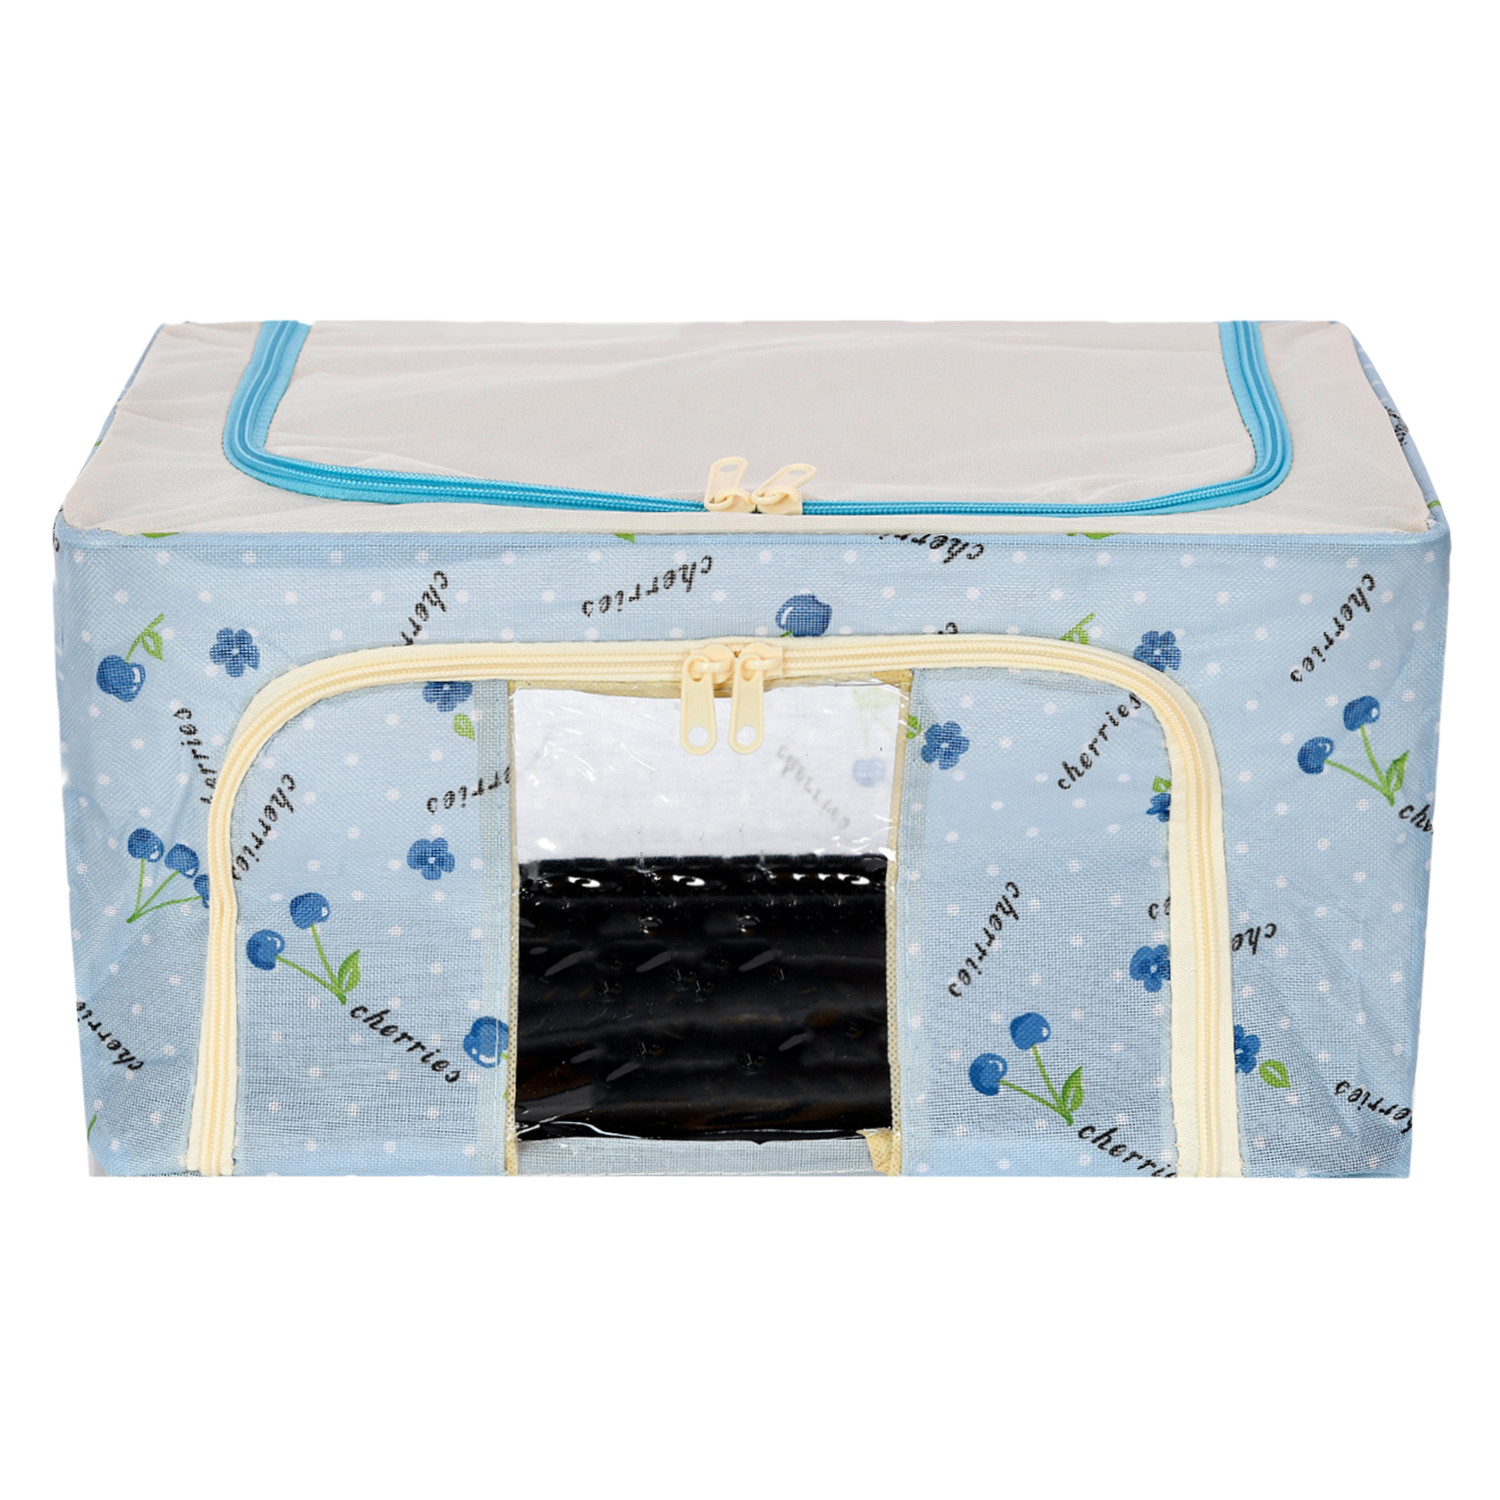 Kuber Industries Storage Box | Steel Frame Living Box | Storage Organizer For Clothes | Saree Cover for Woman | Good Luck Print Cloth Organizer | 22 Liter | Sky Blue